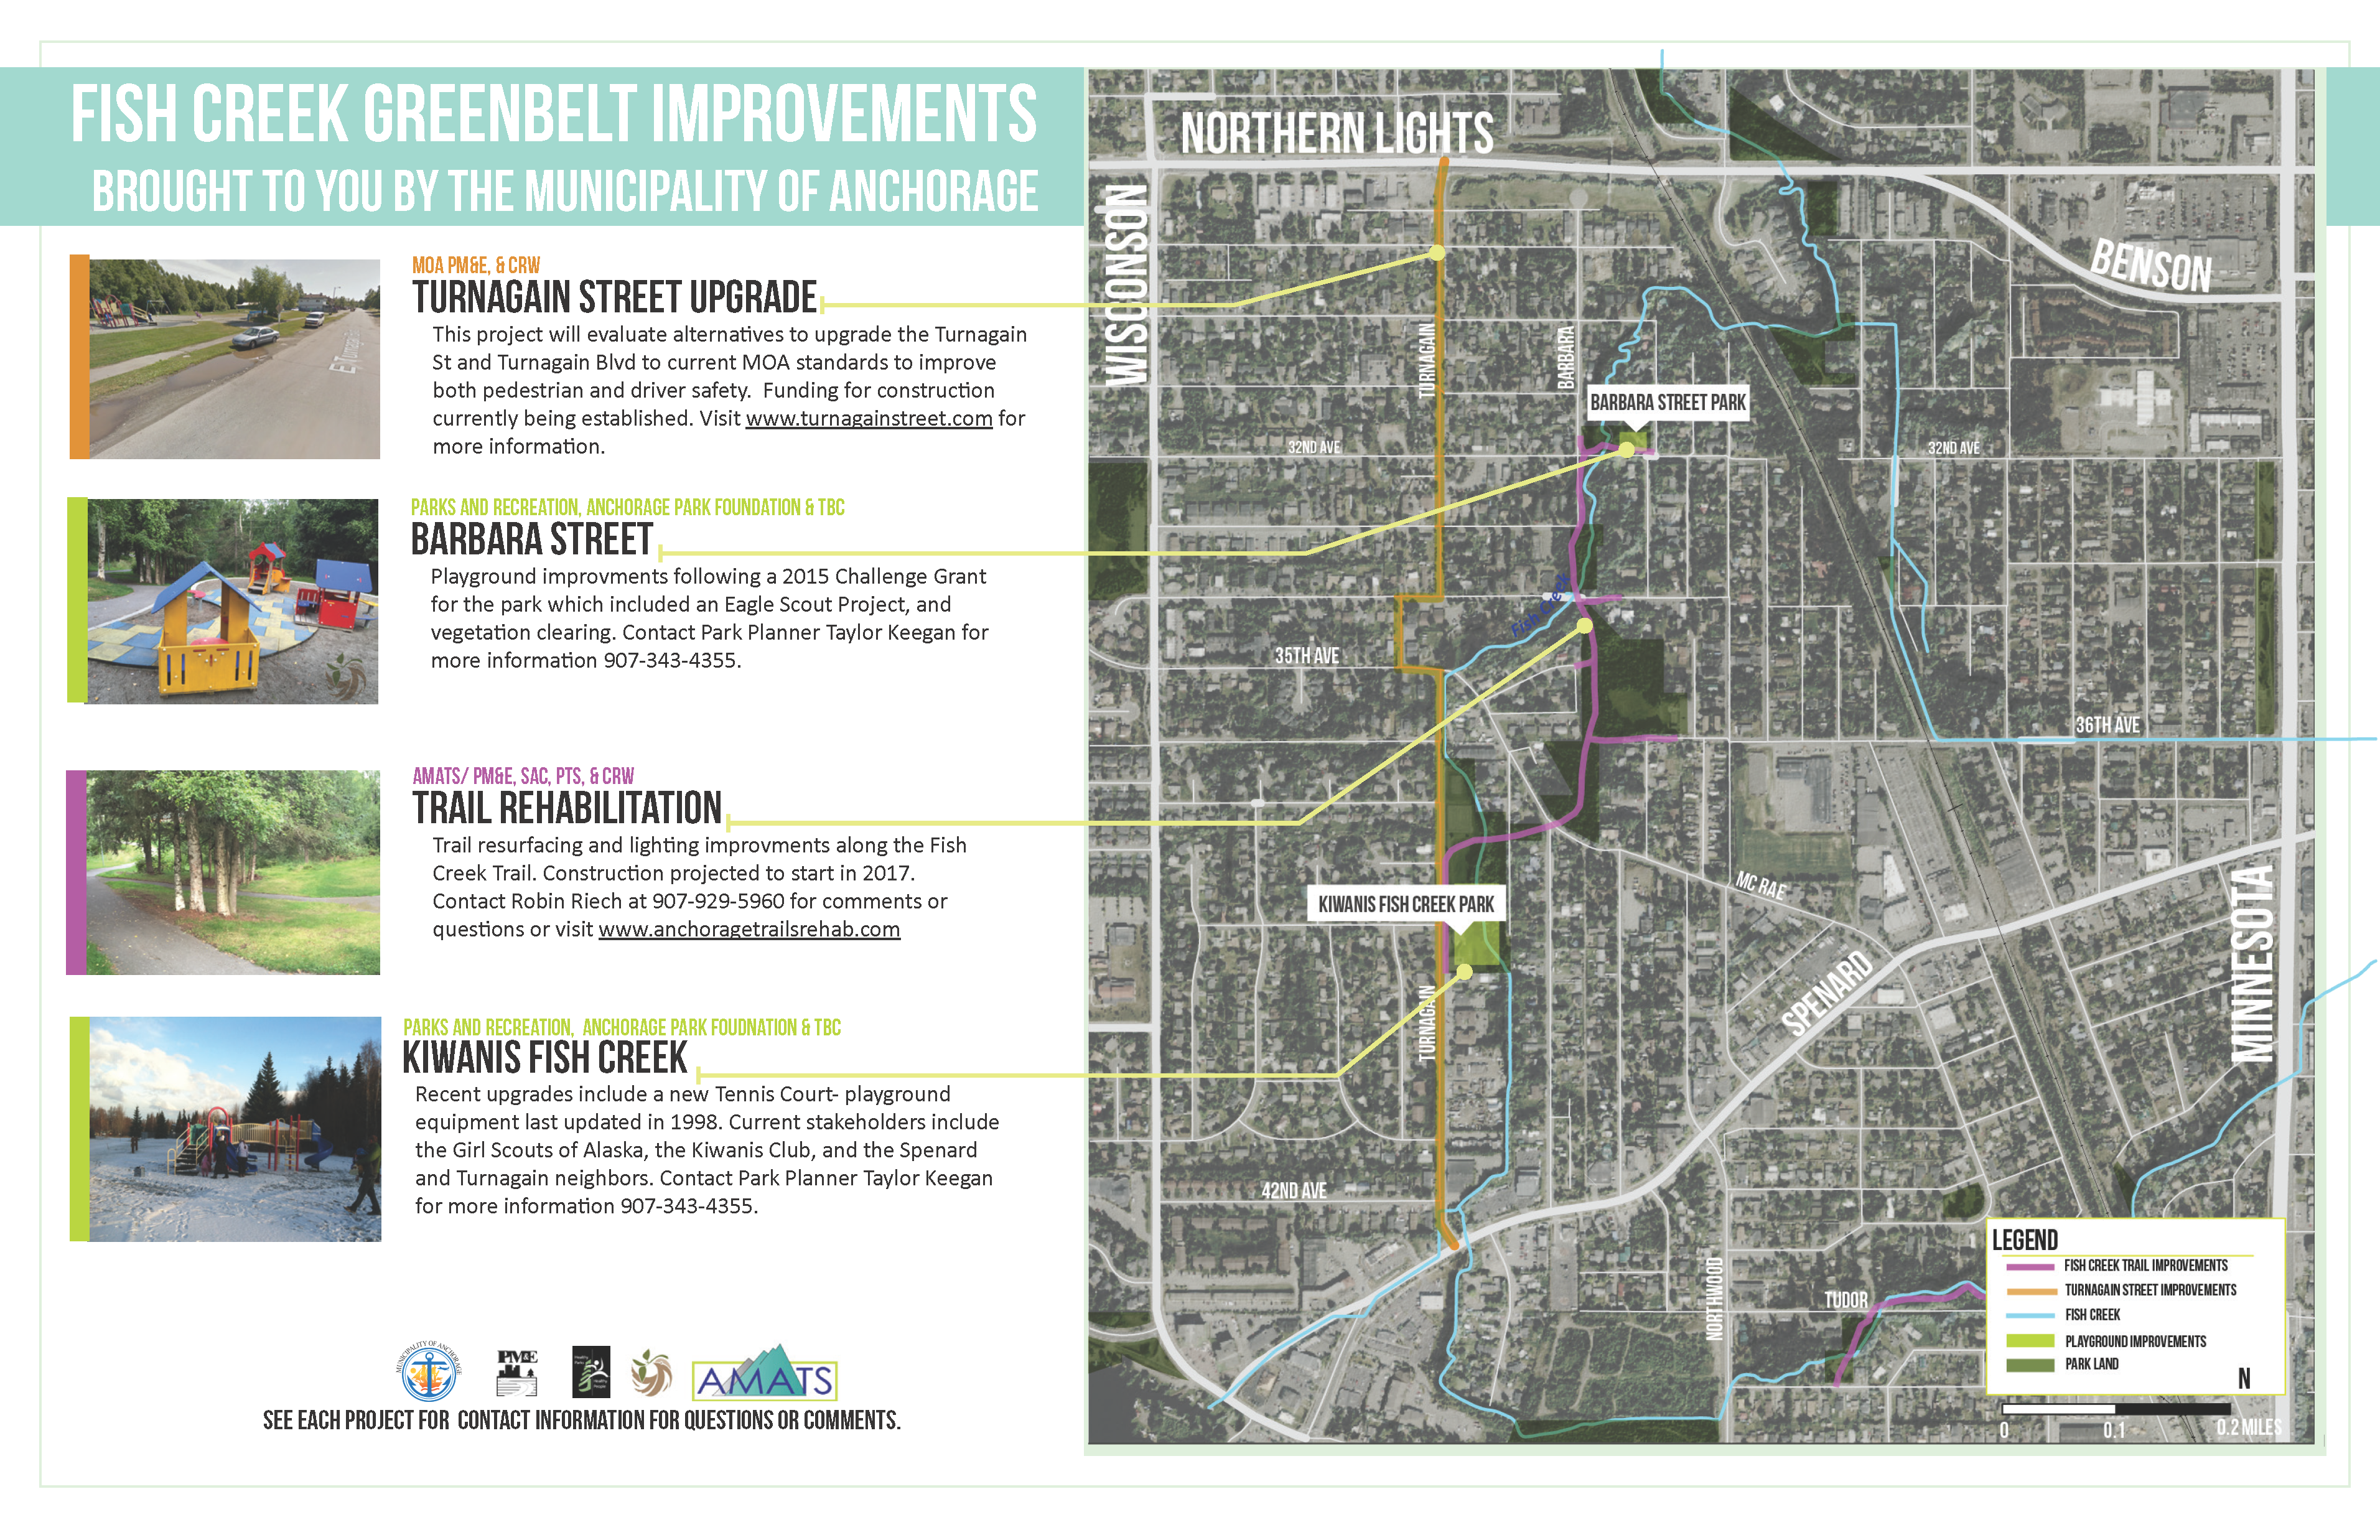 Fish Creek Greenbelt Improvements map, brought to you by the Municipality of Anchorage. Turnagain Street upgrade: This project will evaluate alternatives to upgrade Turnagain St and Turnagain Blvd to current MOA standards to improve both pedestrian and river safety. Funding for construction is currently being established. Visit www.turnagainstreet.com for more information. Barbara Street: Playground improvements following a 2015 Challenge Grant for the park which included an Eagle Scout Project and vegetation cleaning. Contact Park Planner Taylor Keegan for more information at 907-343-4355. Trail rehabilitation: Trail resurfacing and lighting improvements along the Fish Creek Trail. Construction projected to start in 2017. Contact Robin Riech at 907-929-5960 for comments or questions or visit www.anchoragetrailsrehab.com Kiwanis Fish Creek: Recent upgrades include a new tennis court- playground equipment last updated in 1998. Current stakeholders include the Girl Scouts of Alaska, the Kiwanis Club, and the Spenard and Turnagain neighbors. Contact Park Planner, Taylor Keegan for more information 907-343-4355.